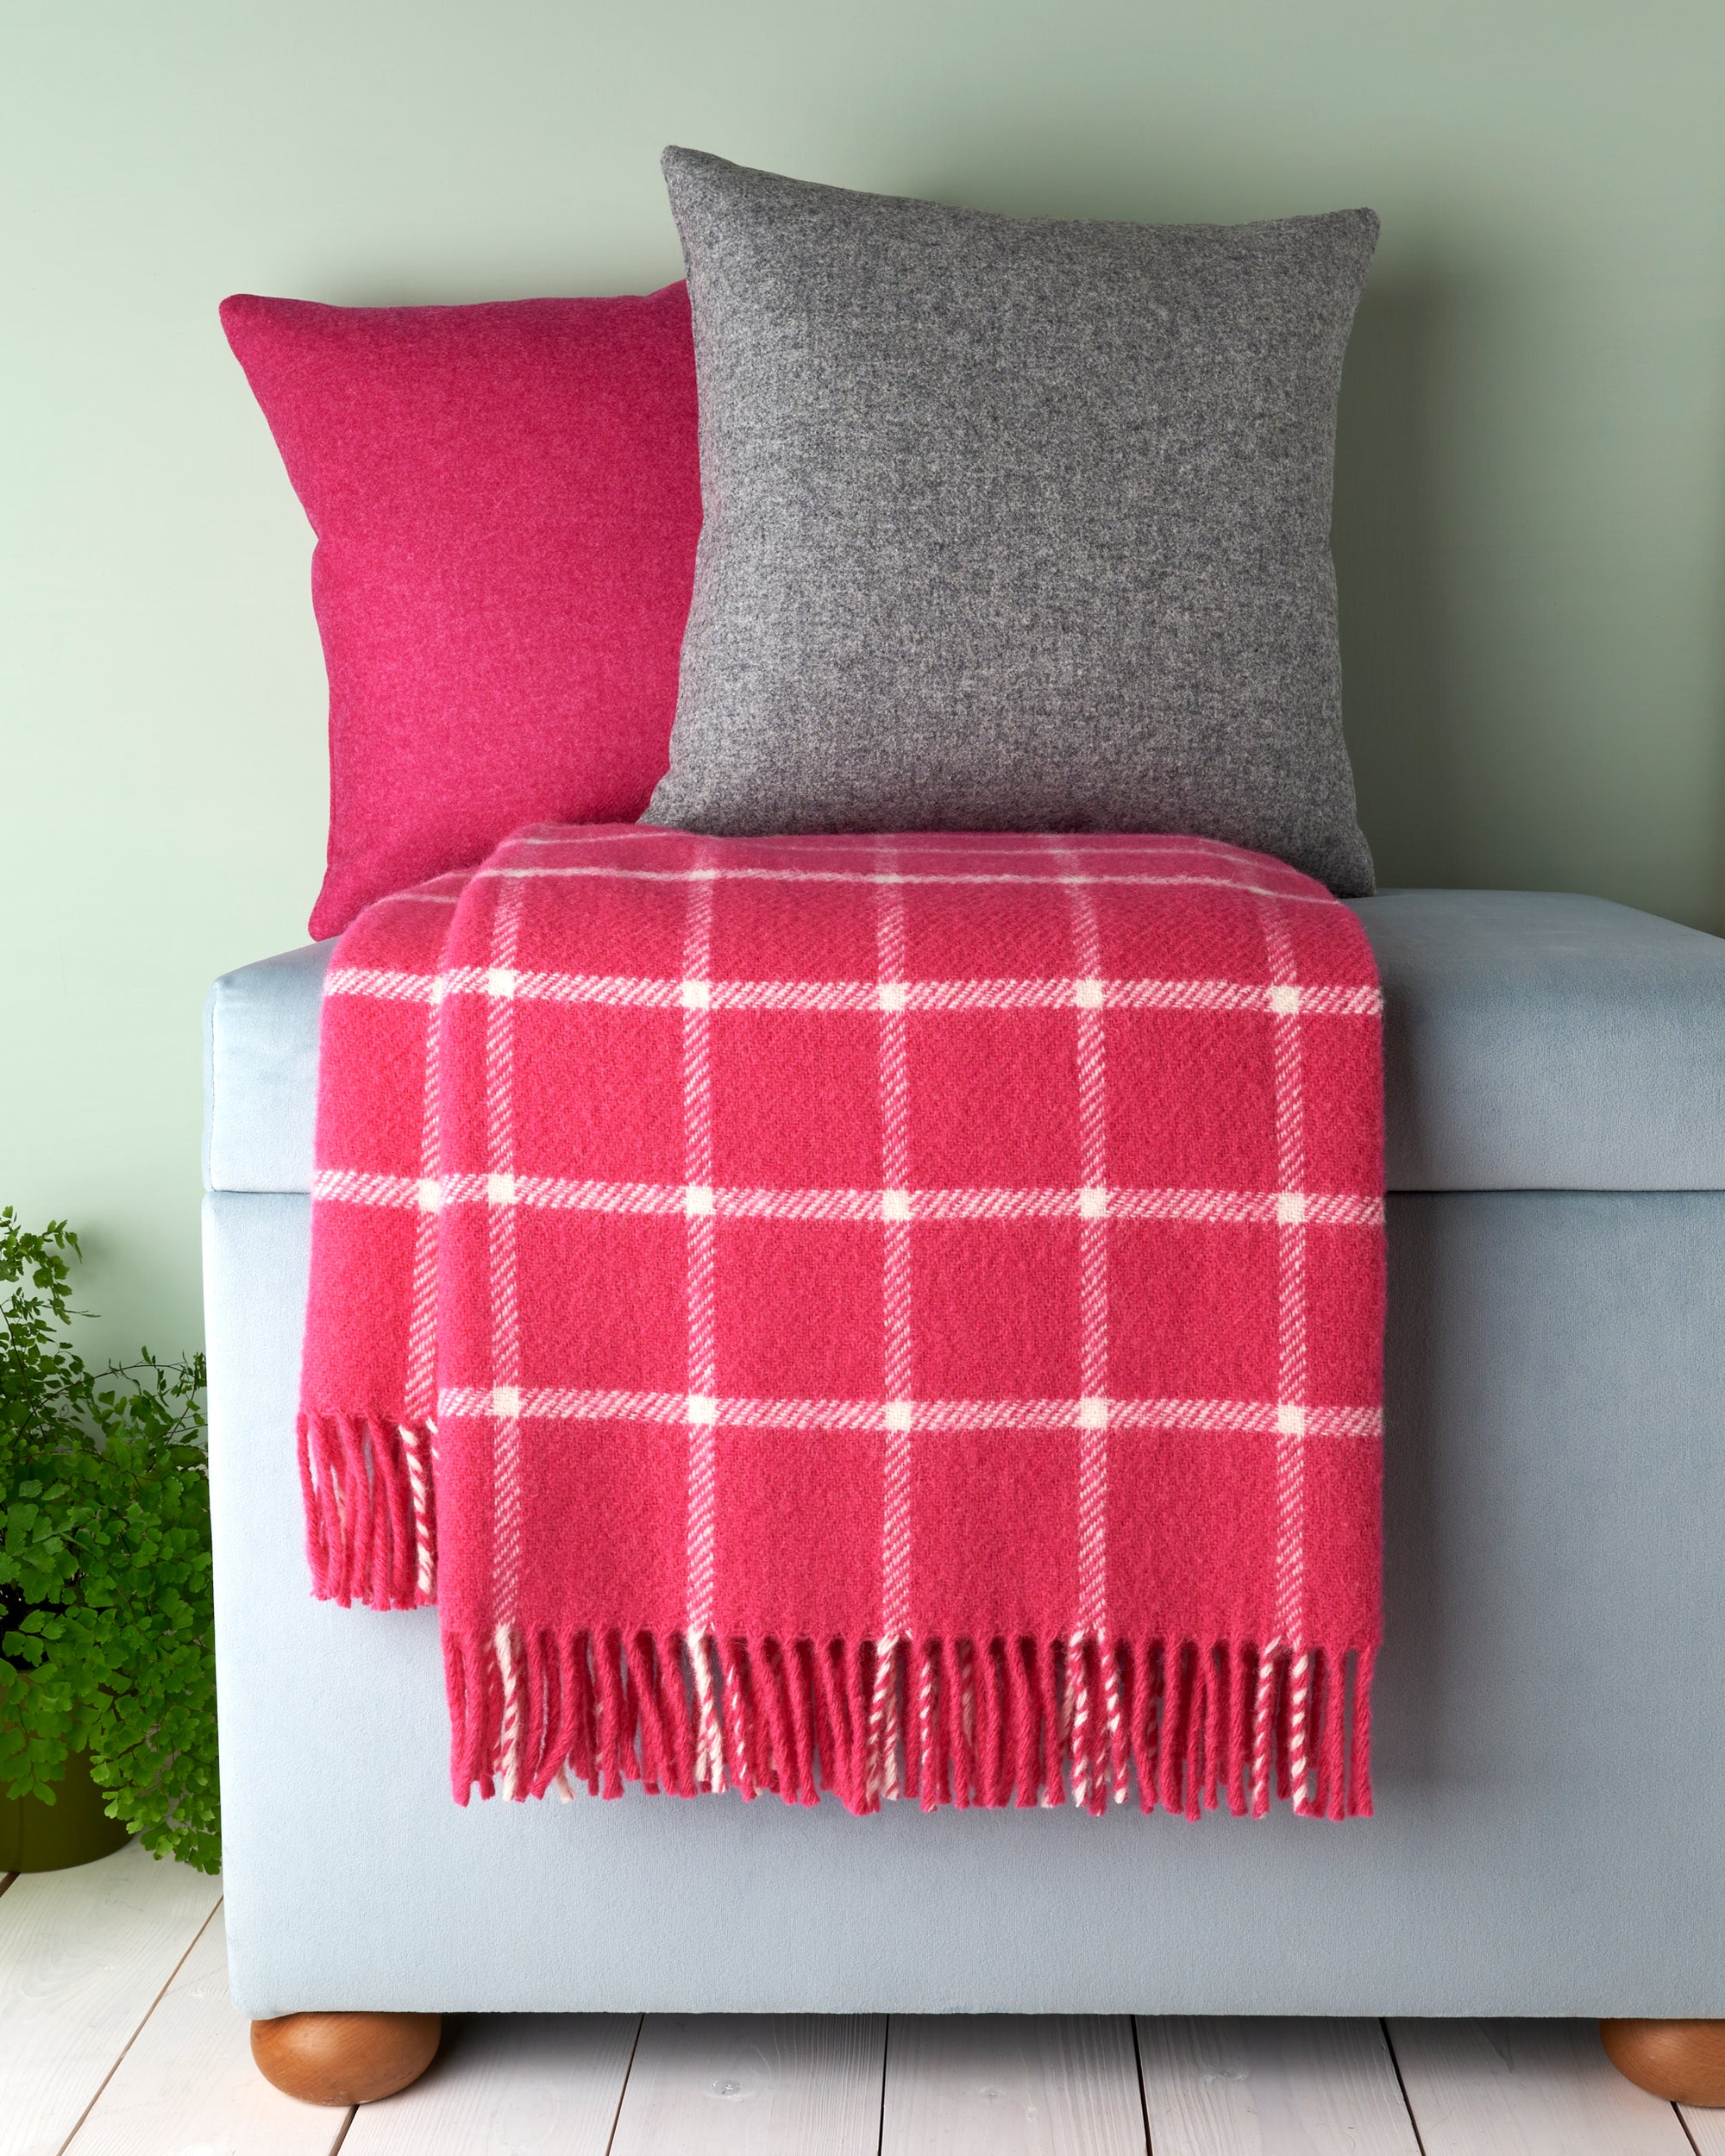 Tweedmill Chequered Check Pink Wool Blanket Throw